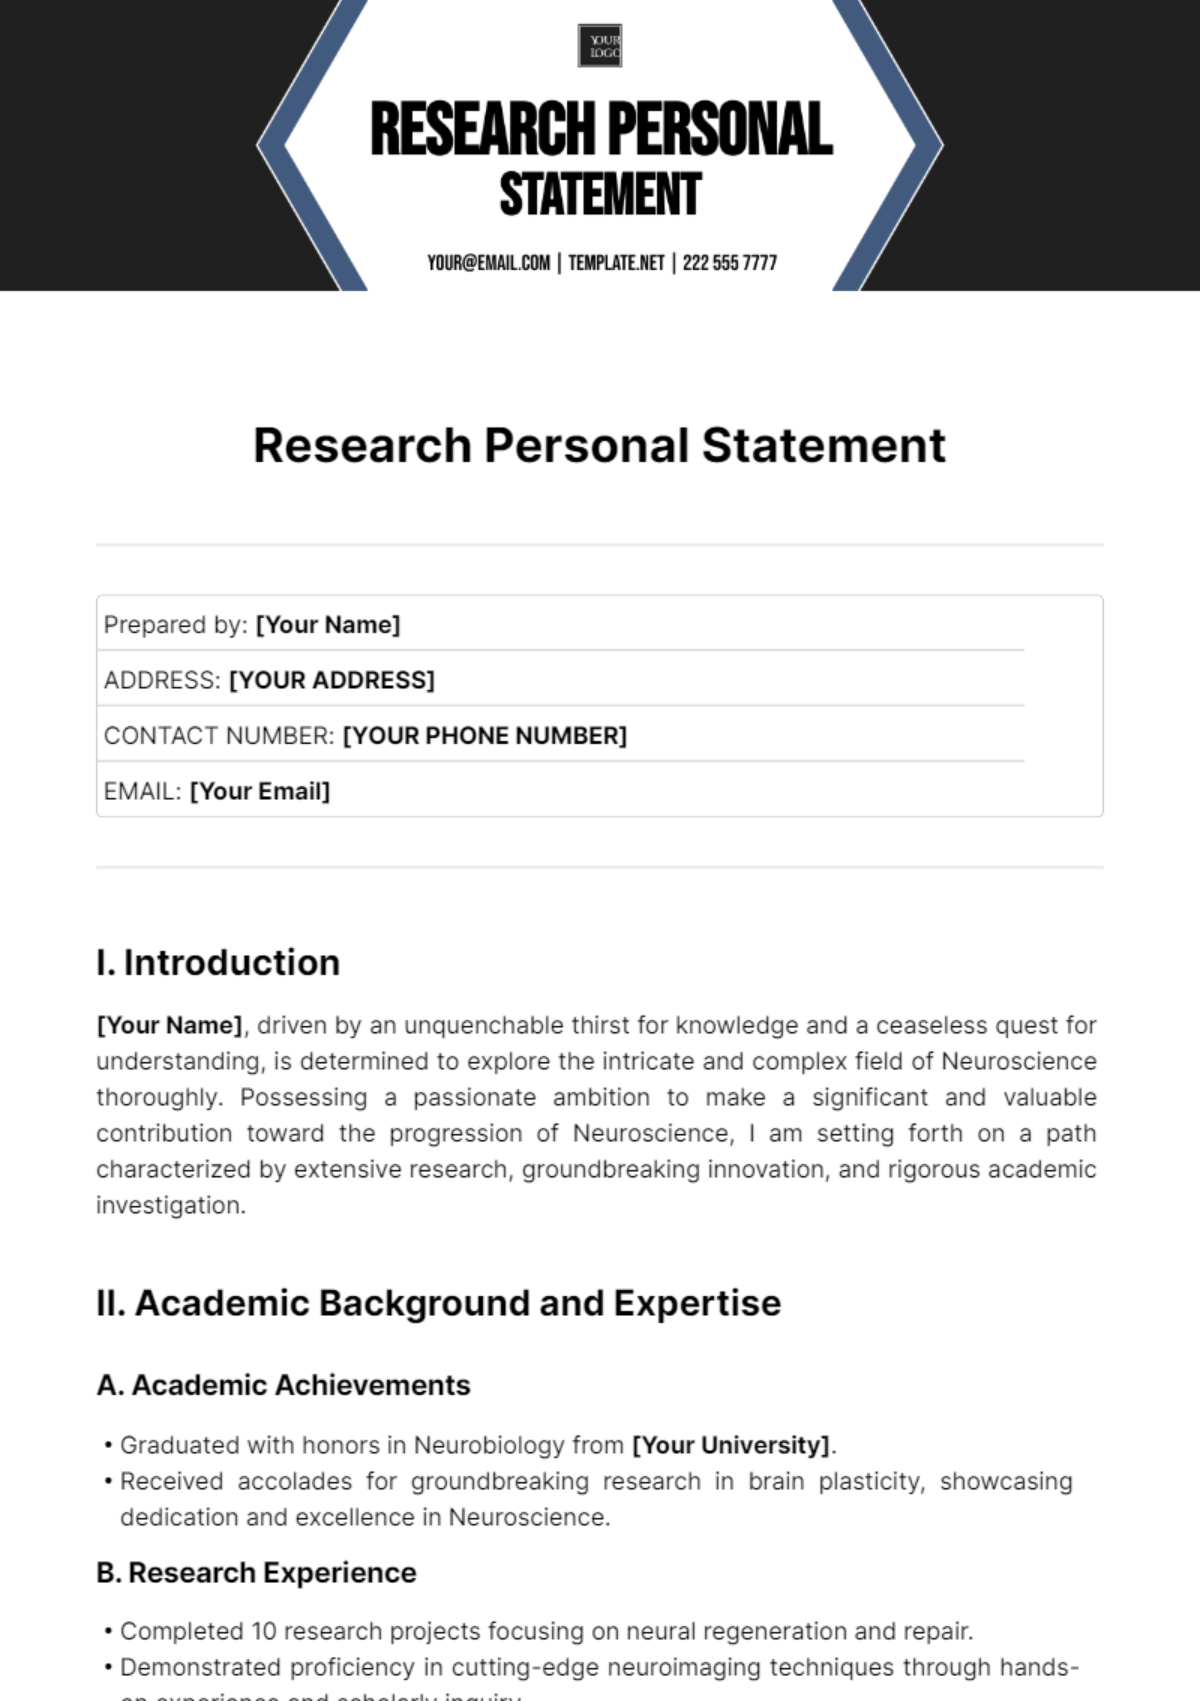 Research Personal Statement Template